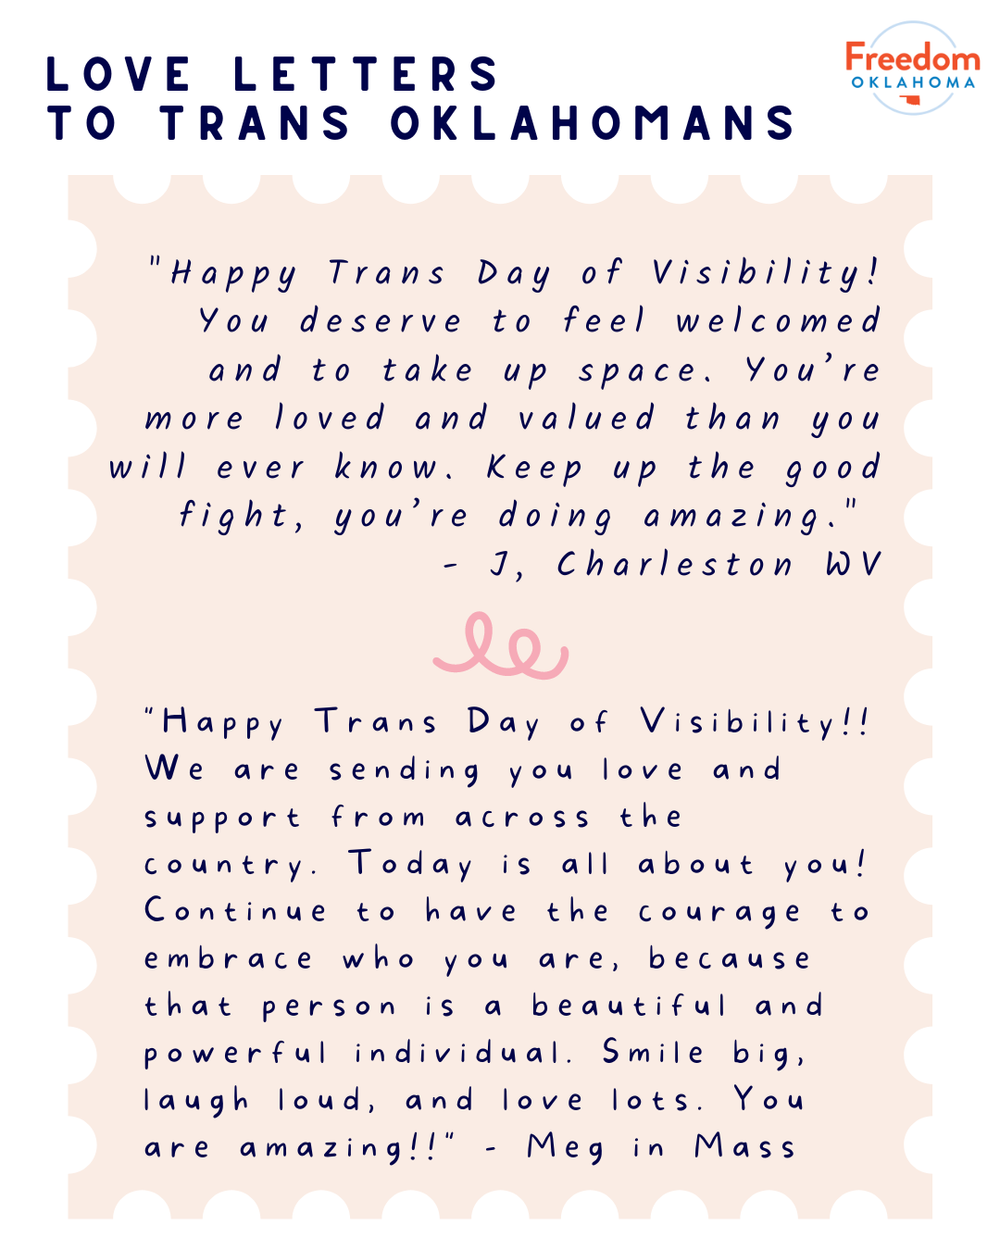  "Love Letters to Trans Oklahomans" on a white background. A graphic of a beige stamp takes up most of the graphic with the text of 2 love letters. #1: "Happy Trans Day of Visibility! You deserve to feel welcomed and to take up space. You’re more lov